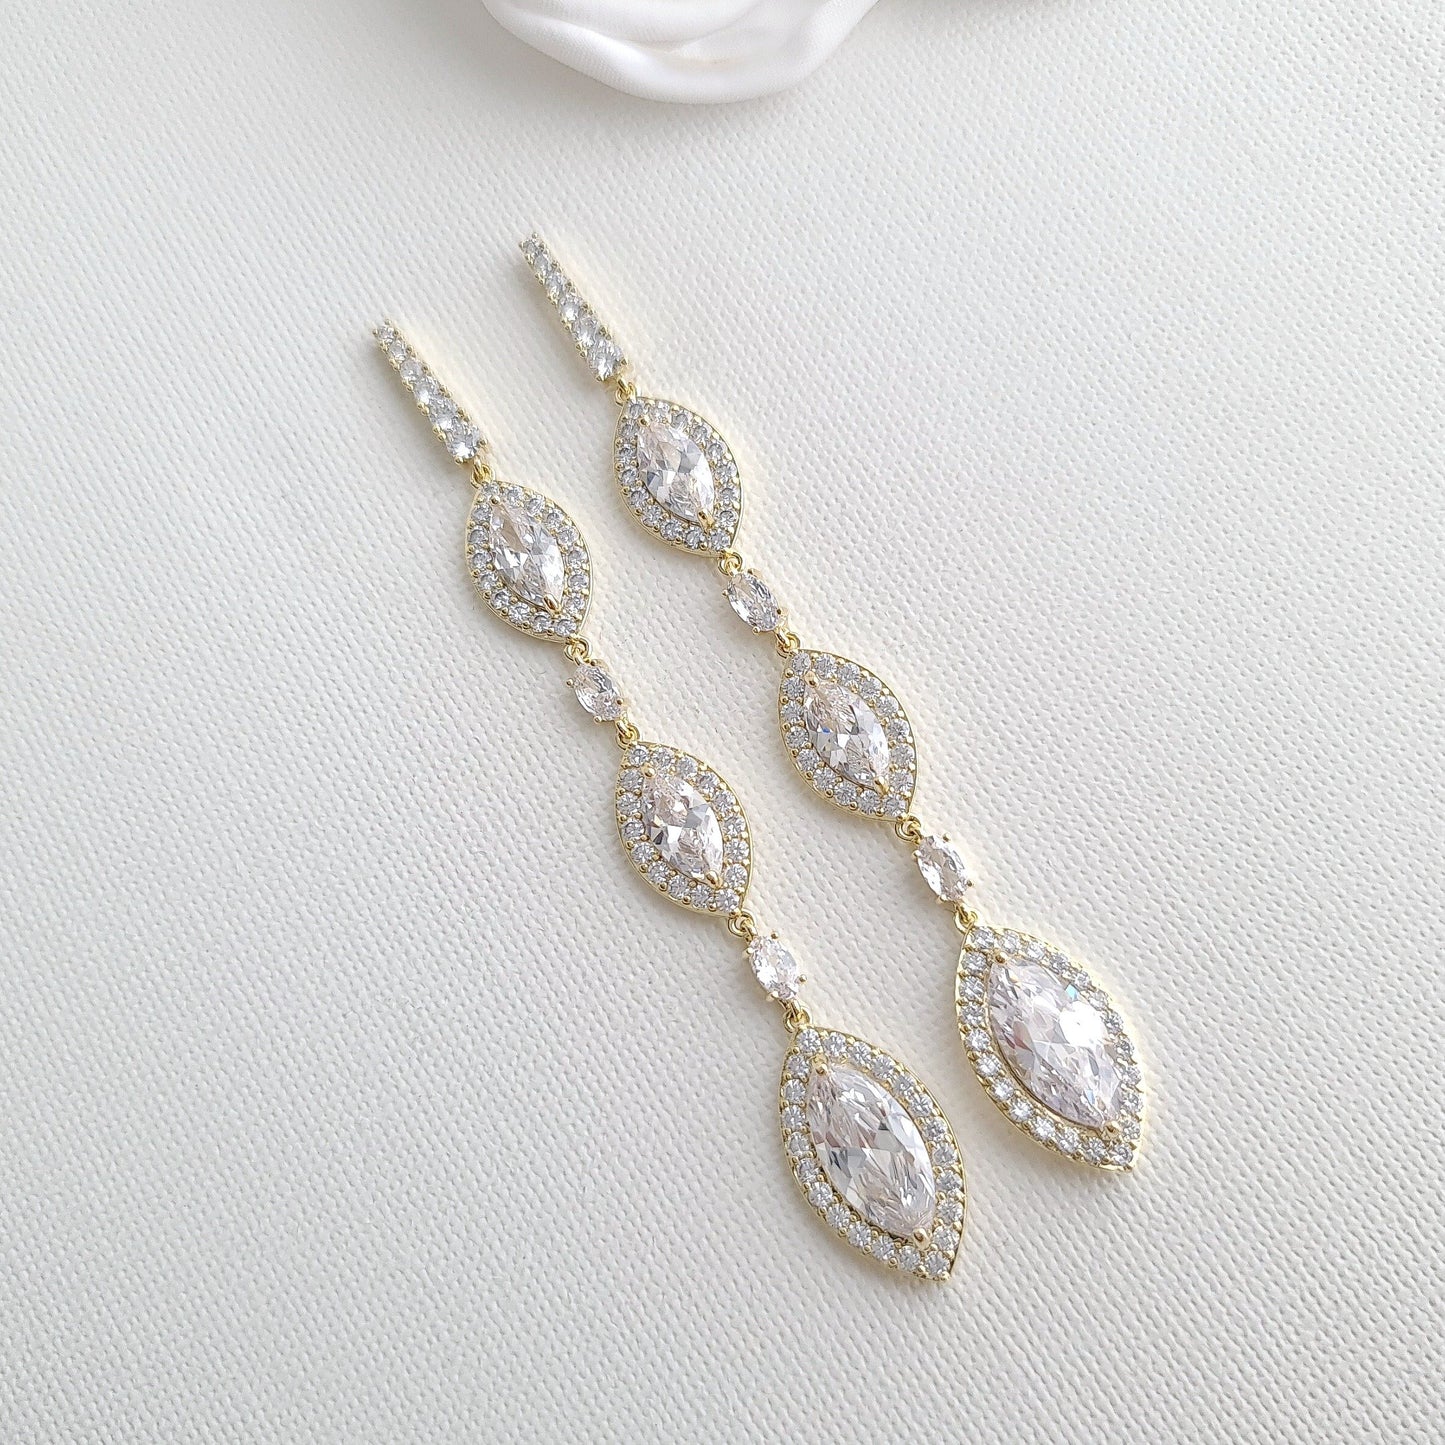 Gold & Cubic Zirconia Extra Long Earrings for Brides, Women for Wedding Prom-Poetry Design